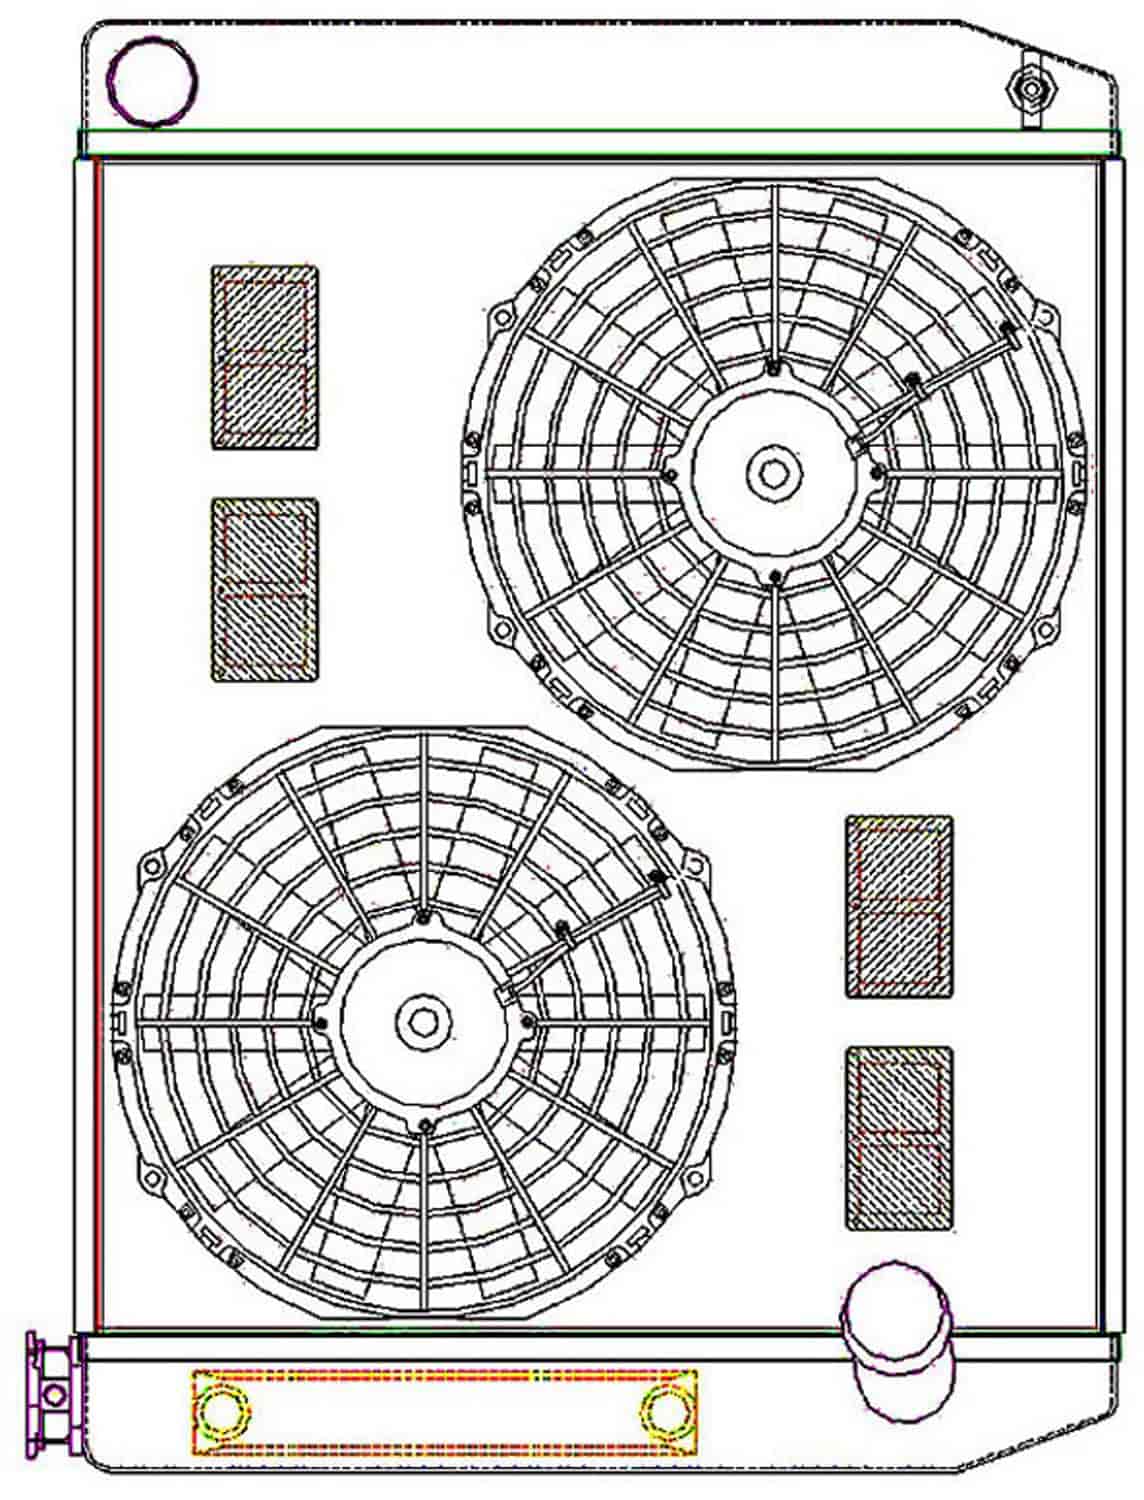 ClassicCool ComboUnit Universal Fit Radiator and Fan Single Pass Crossflow Design 26" x 19" with Transmission Cooler